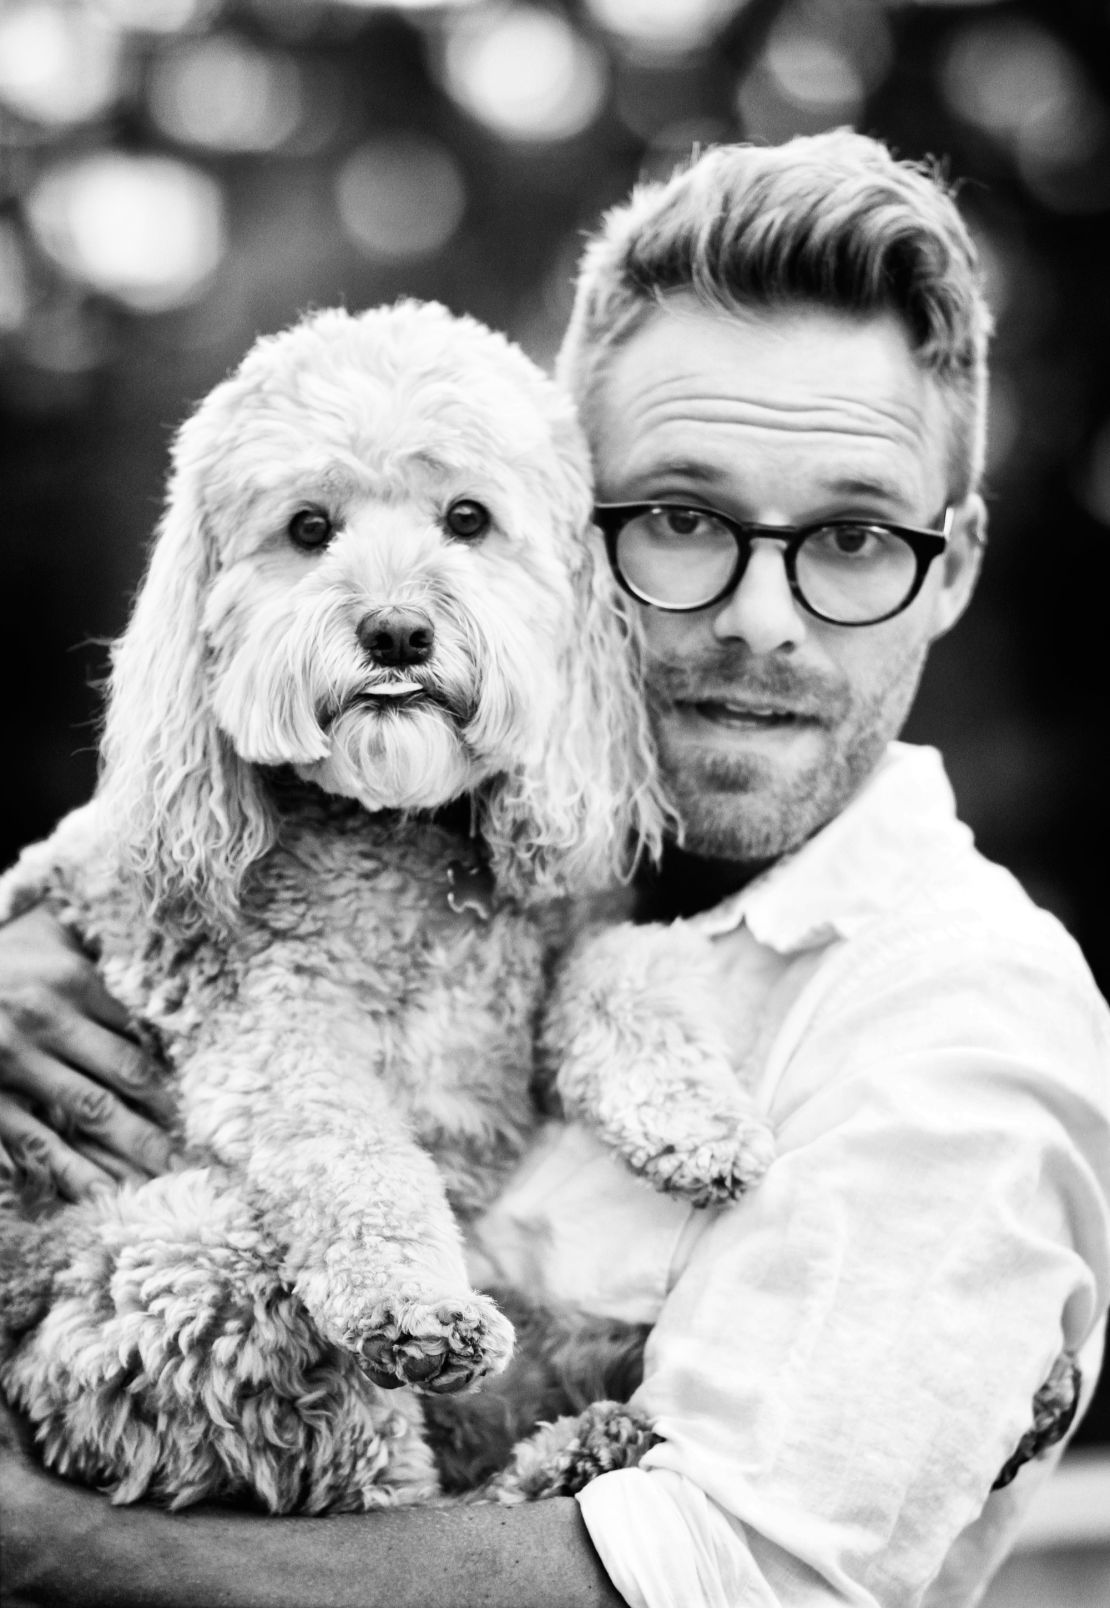 Seth Casteel hadn't planned on a career taking photos of dogs. 